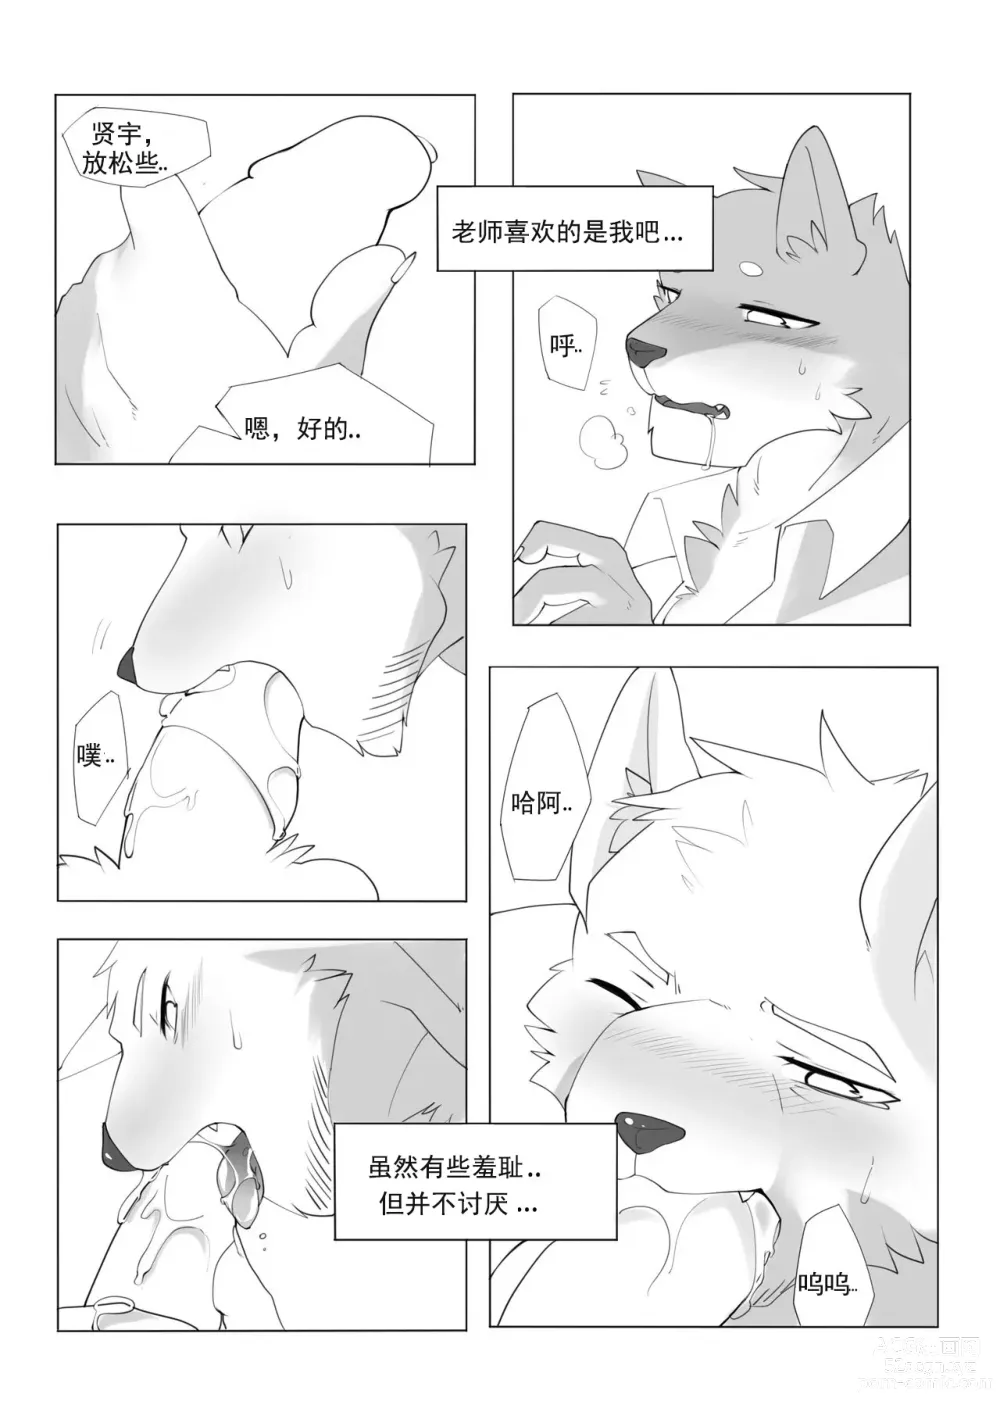 Page 21 of doujinshi 单恋 （工口译制）